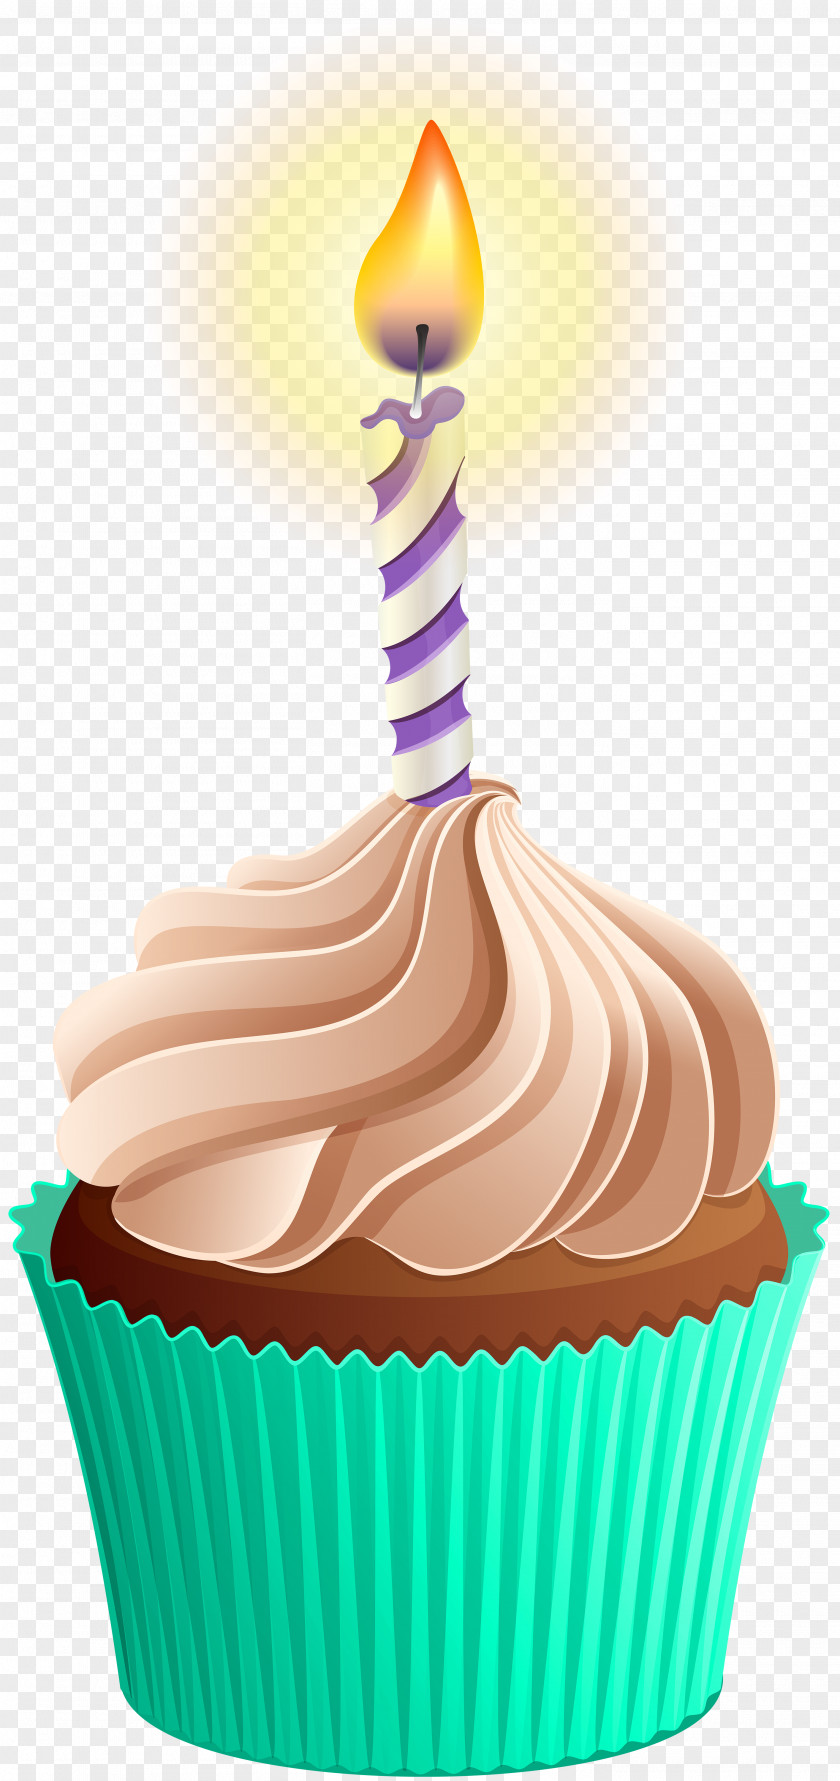 Birthday Cupcakes Clip Art American Muffins PNG